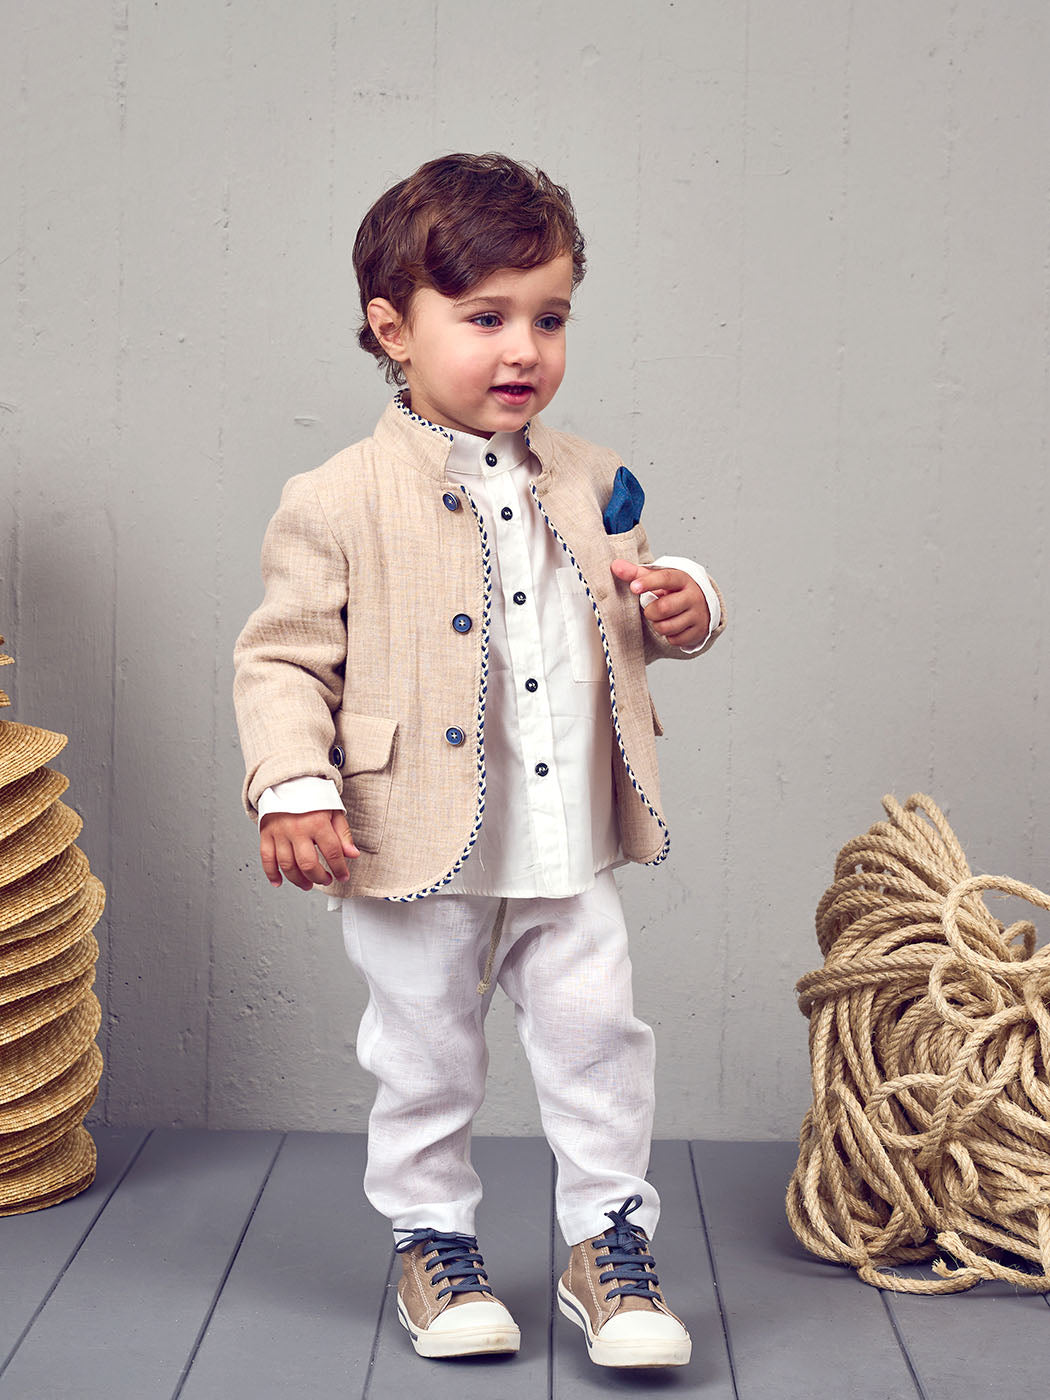 Baptism outfit with Jacquard jacket - STEWART